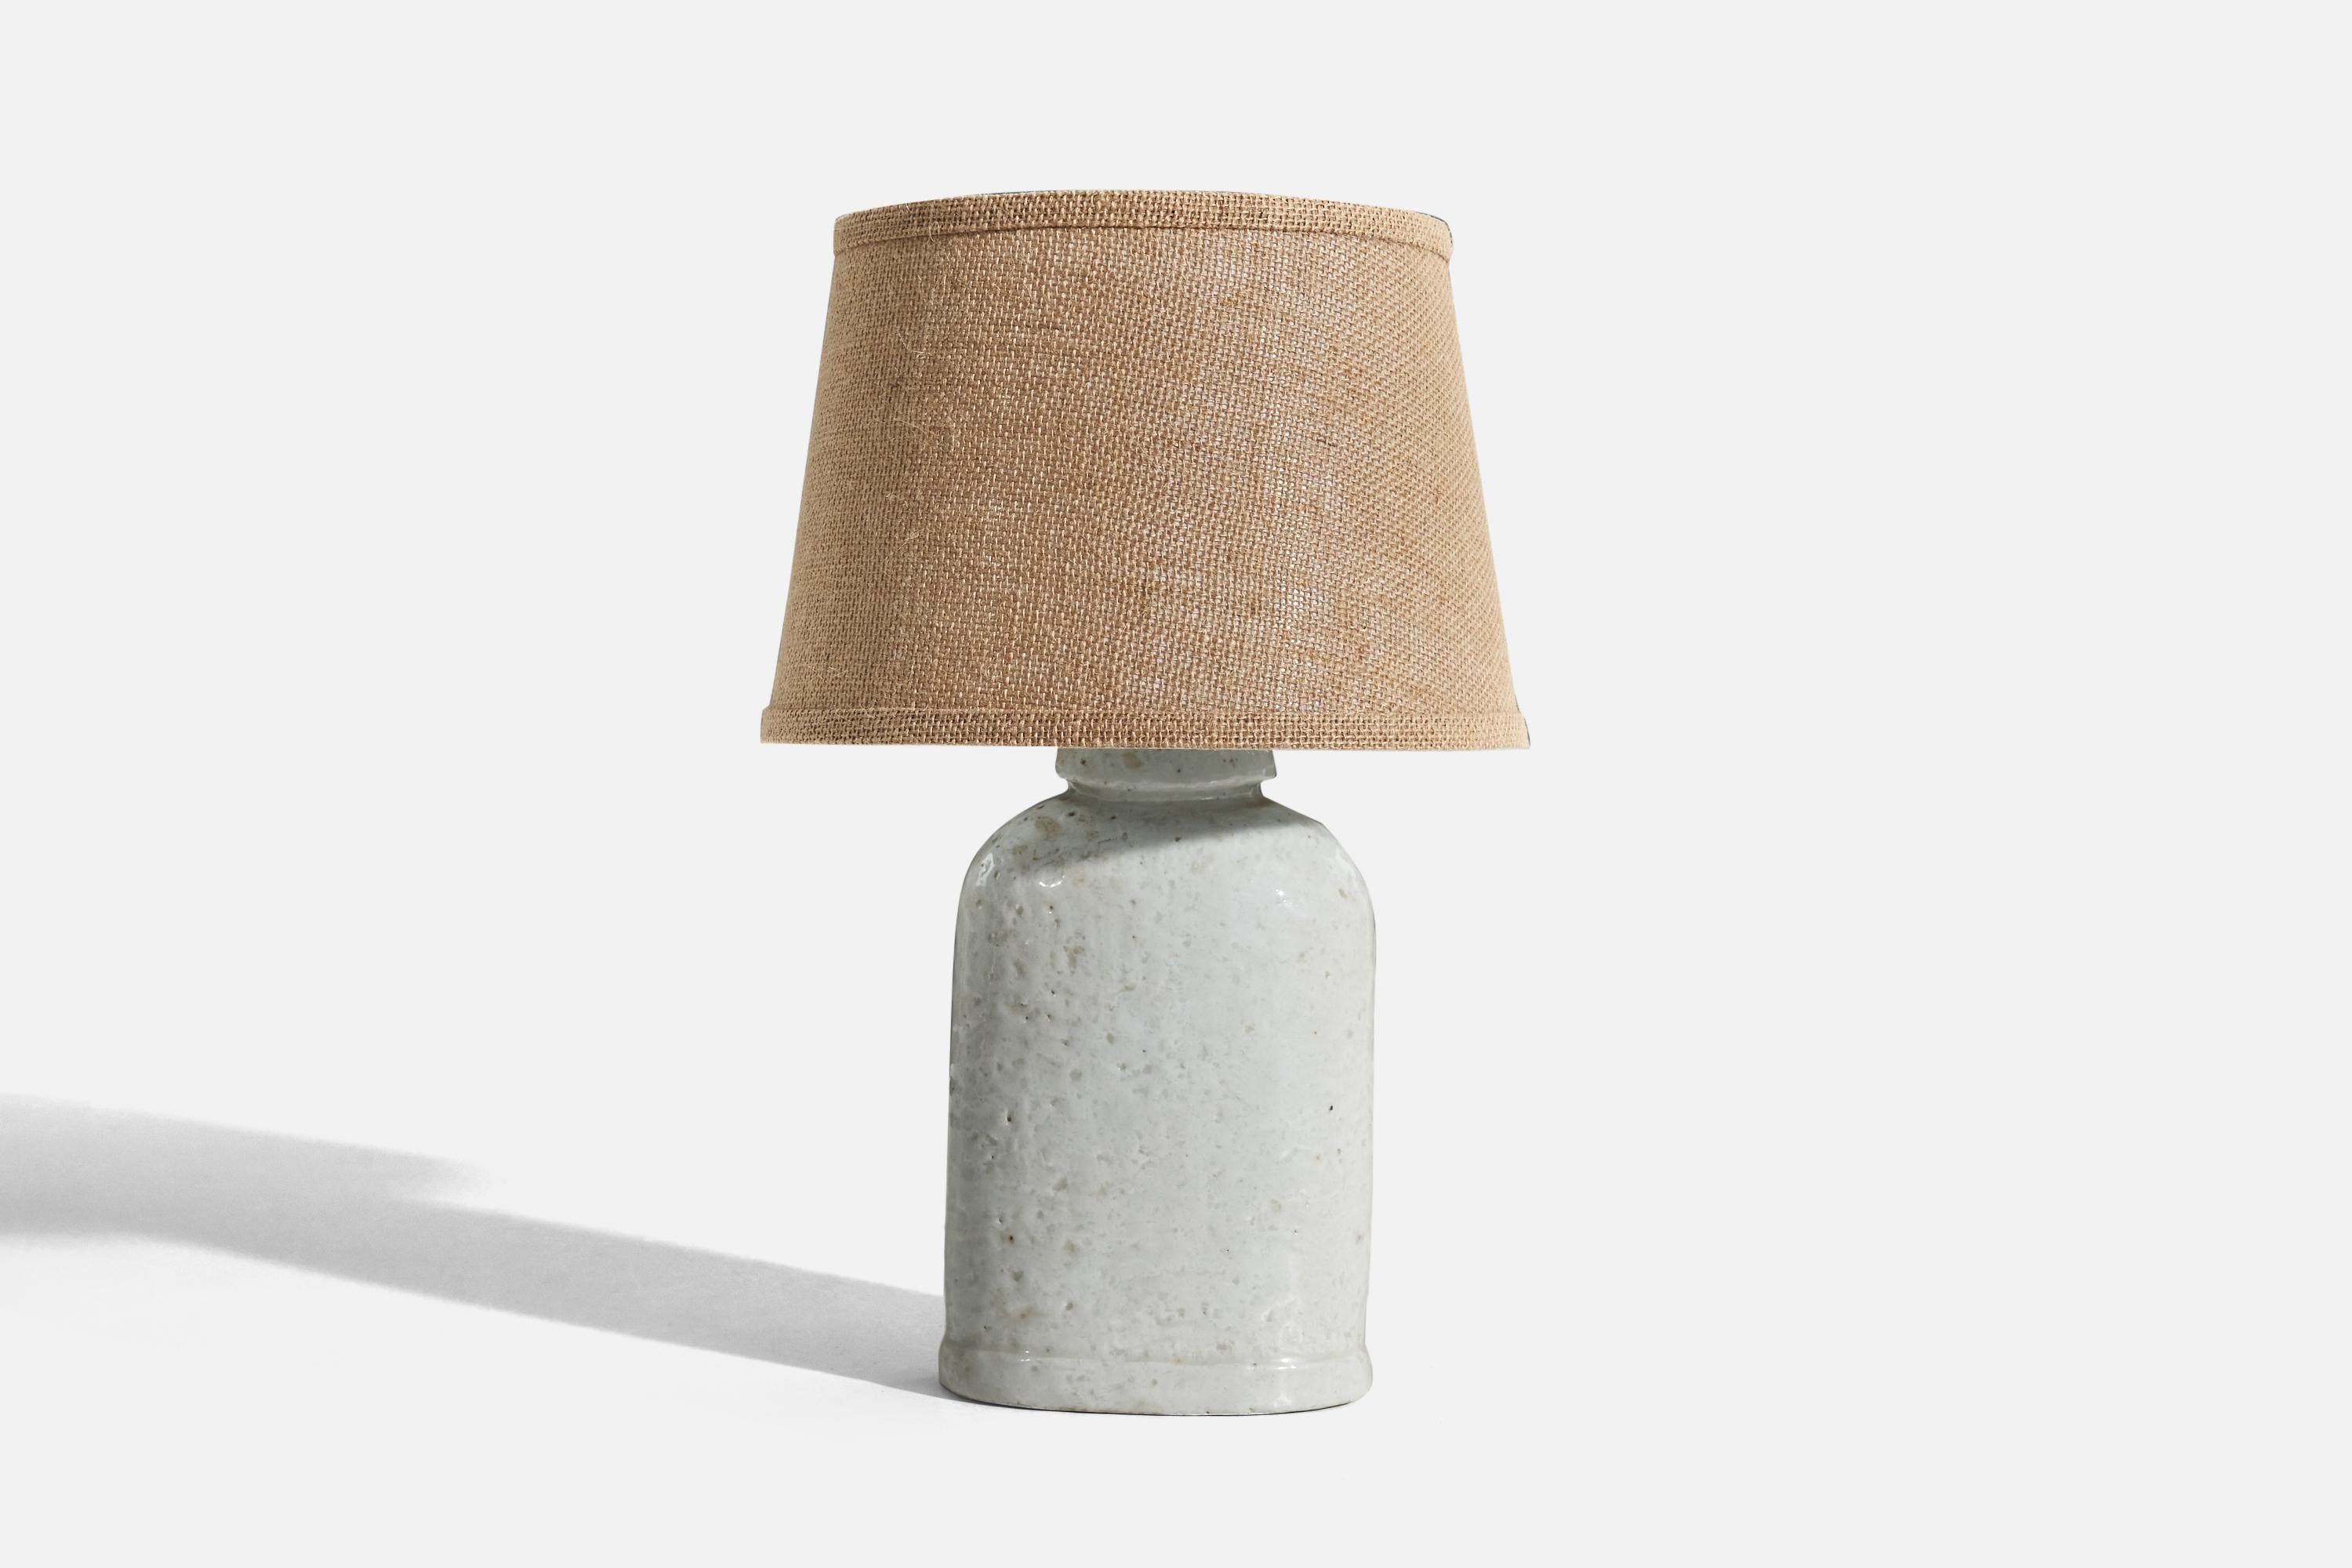 A white, glazed stoneware table lamp designed by Gunnar Nylund and produced by Rörstrand, Sweden, 1950s. 

Sold without lampshade. 
Dimensions of Lamp (inches) : 12.12 x 5.87 x 3.5 (H x W x D)
Dimensions of Shade (inches) : 8 x 10.25 x 7 (T x B